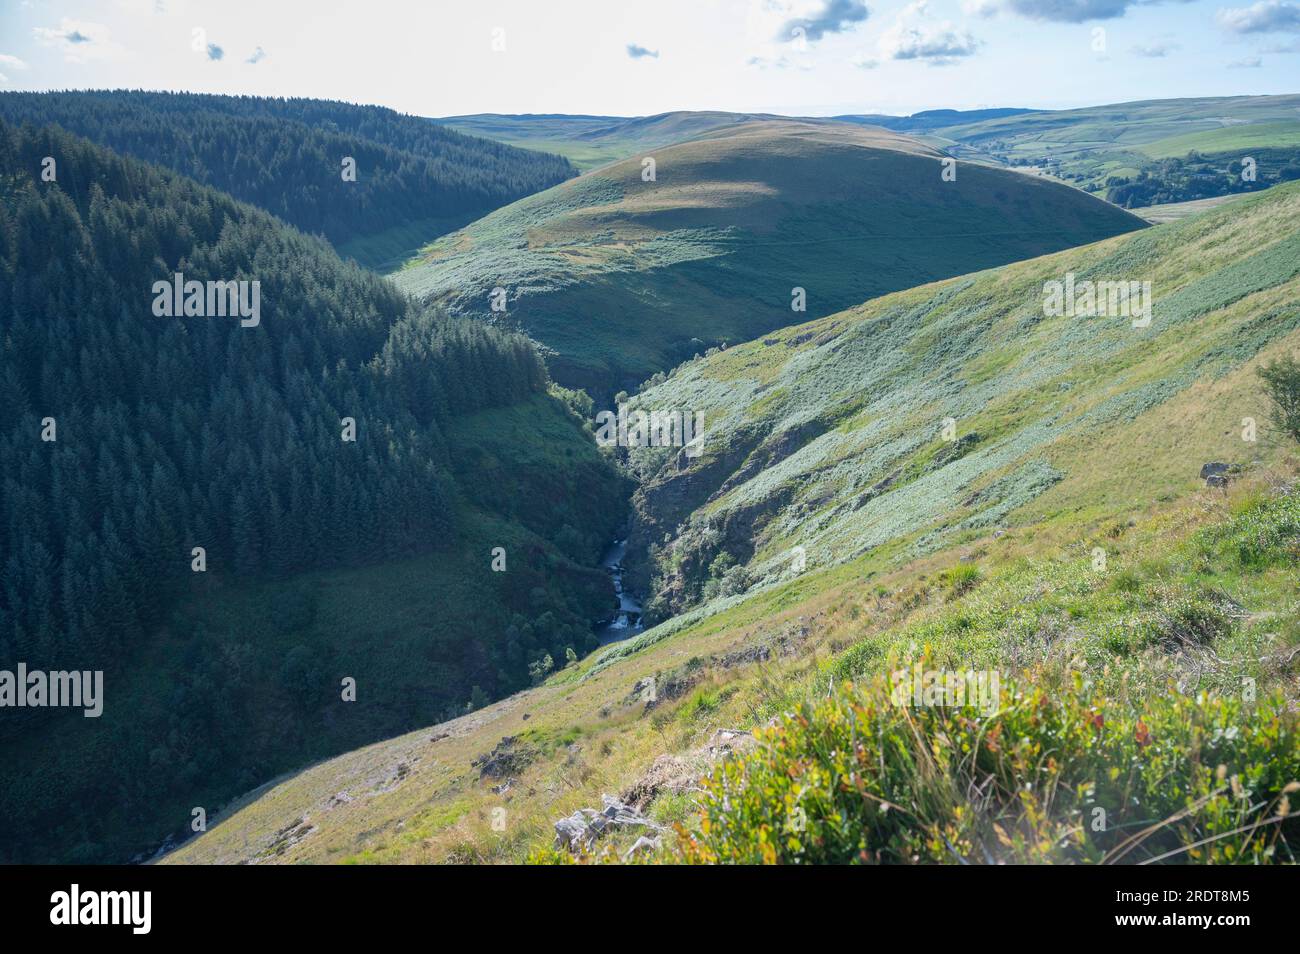 Hafod Las and Pen y Garfan forming a barren upland area between the Pysgotwr Fawr and Fach, Mid-Wales, UK Stock Photo